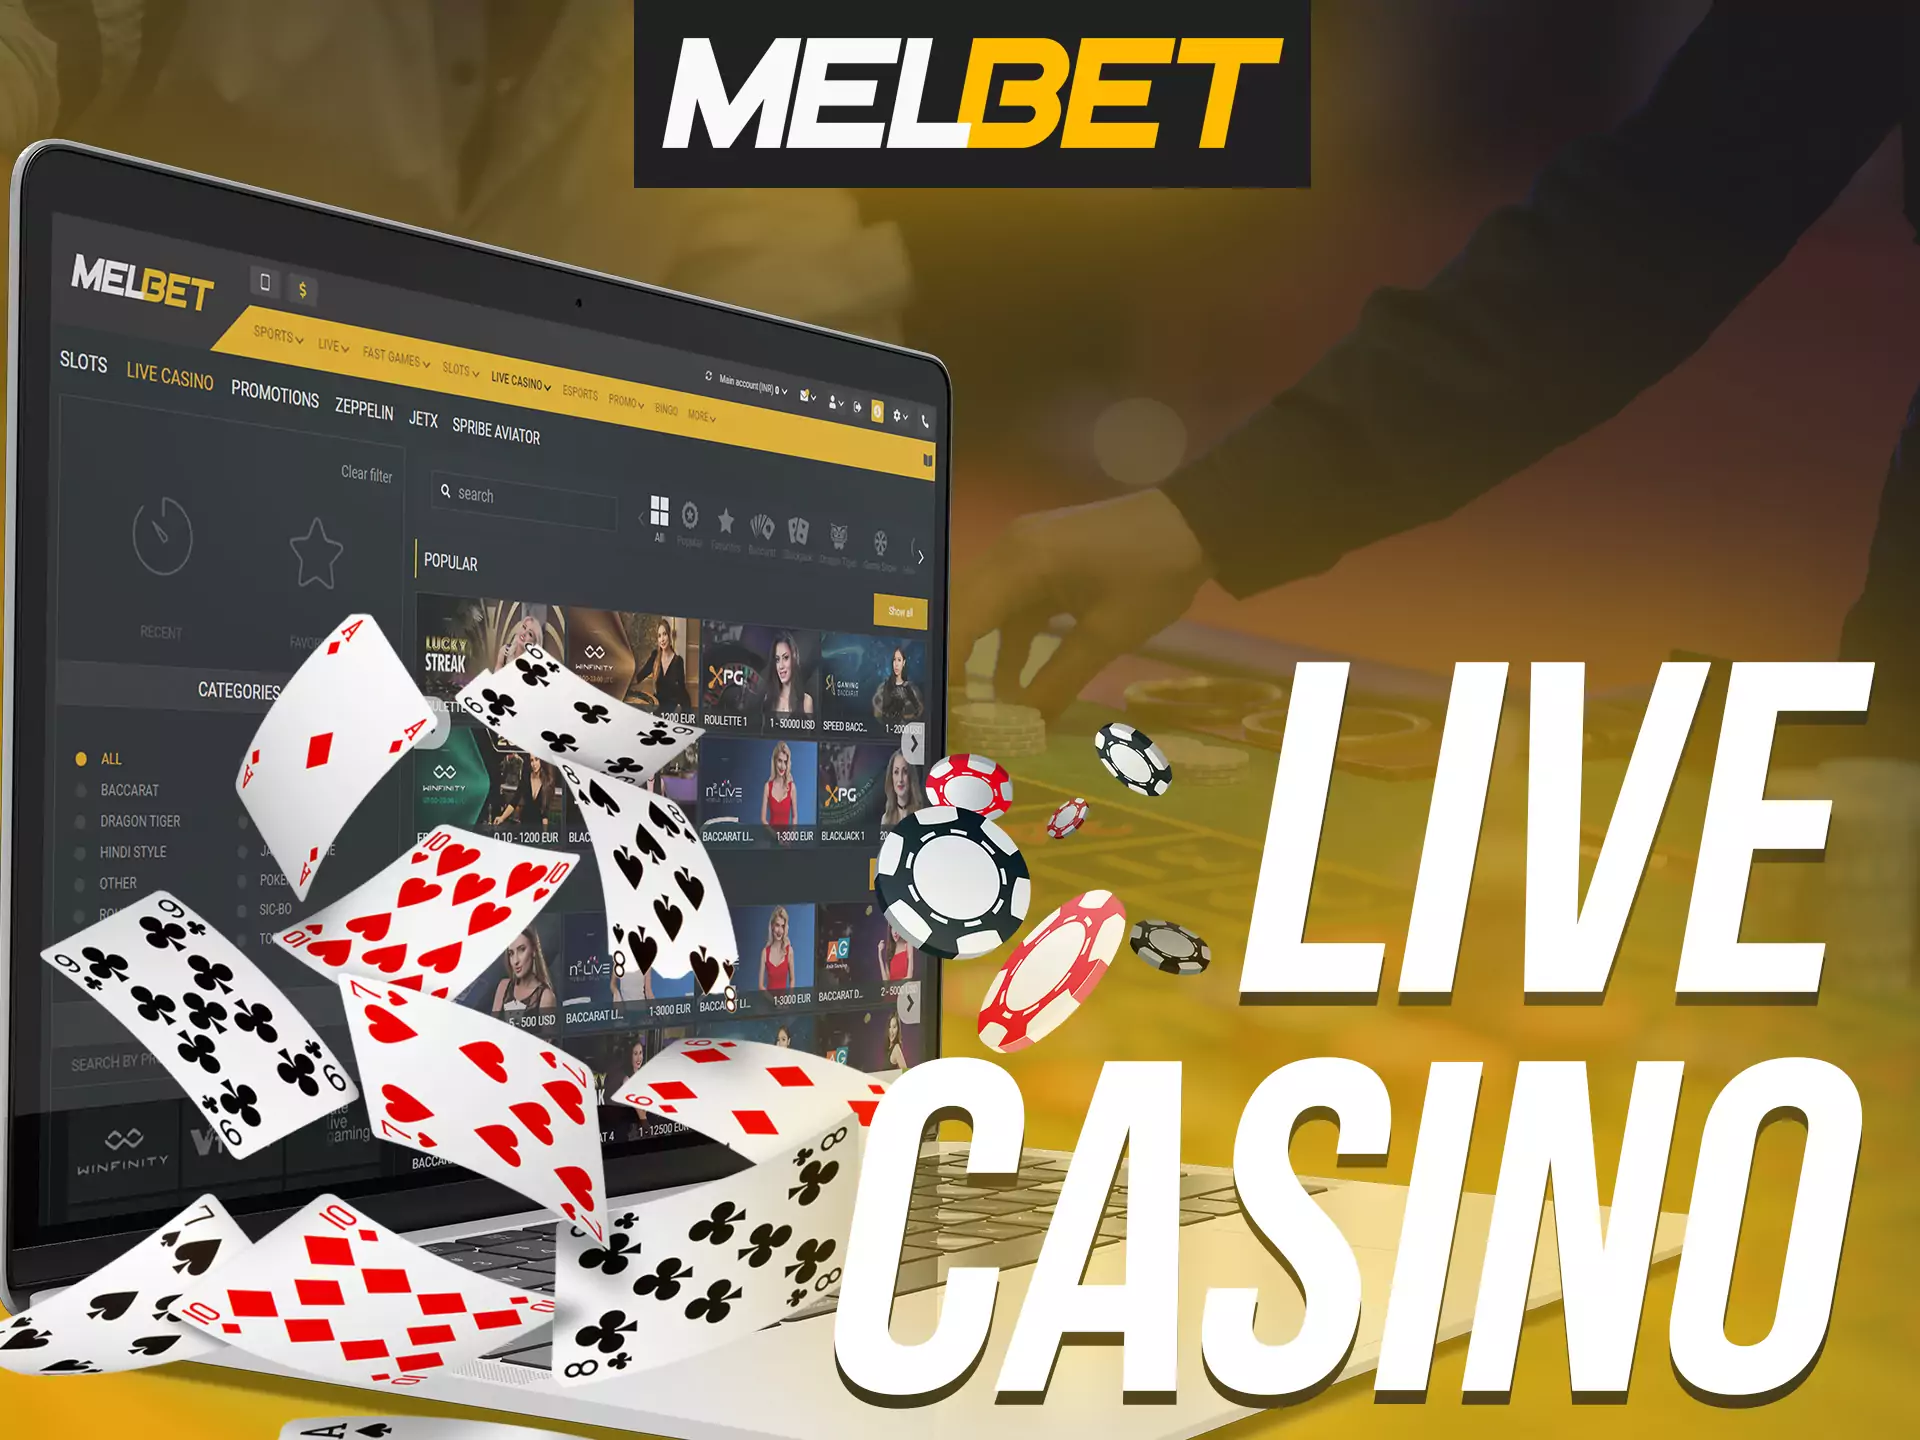 Play Melbet live casino with real people.